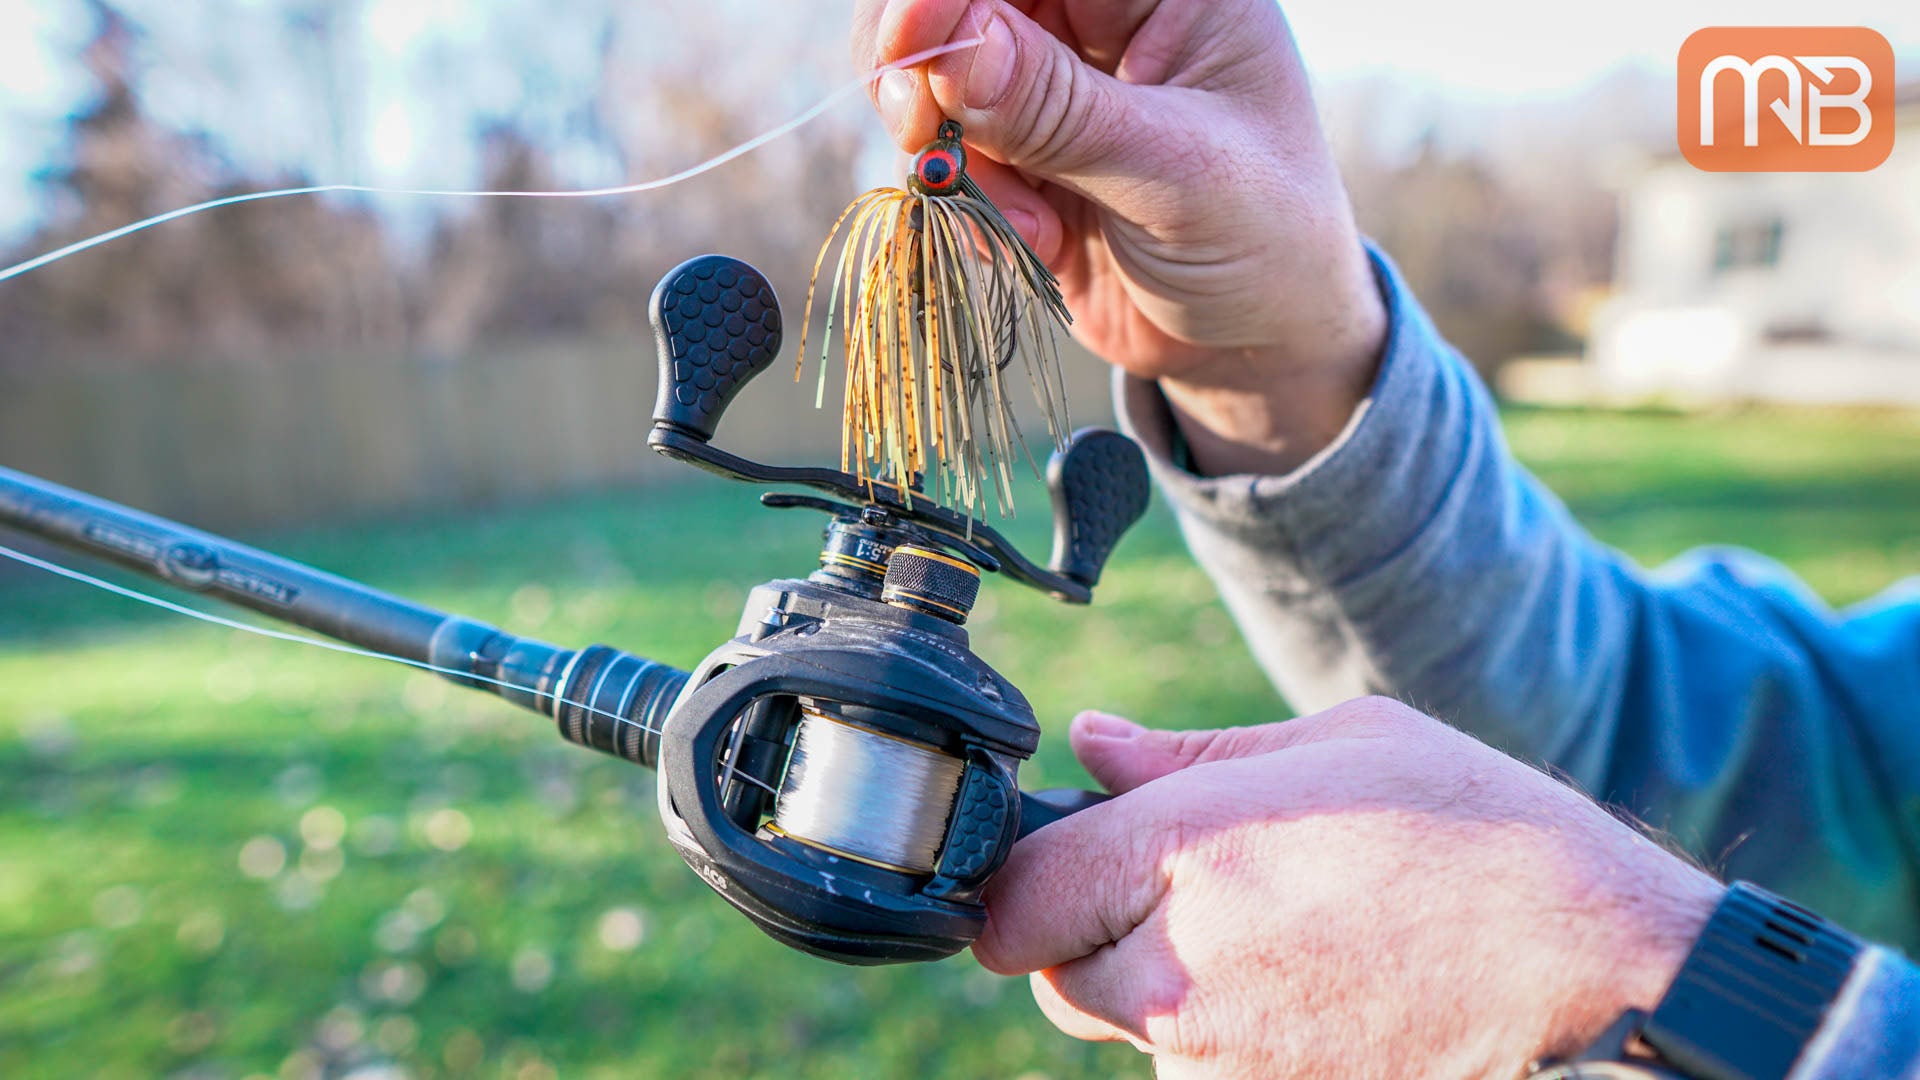 How to fix a backlash on a baitcaster #learnontiktok #fishingtips #fis, How To Use A Bait Caster